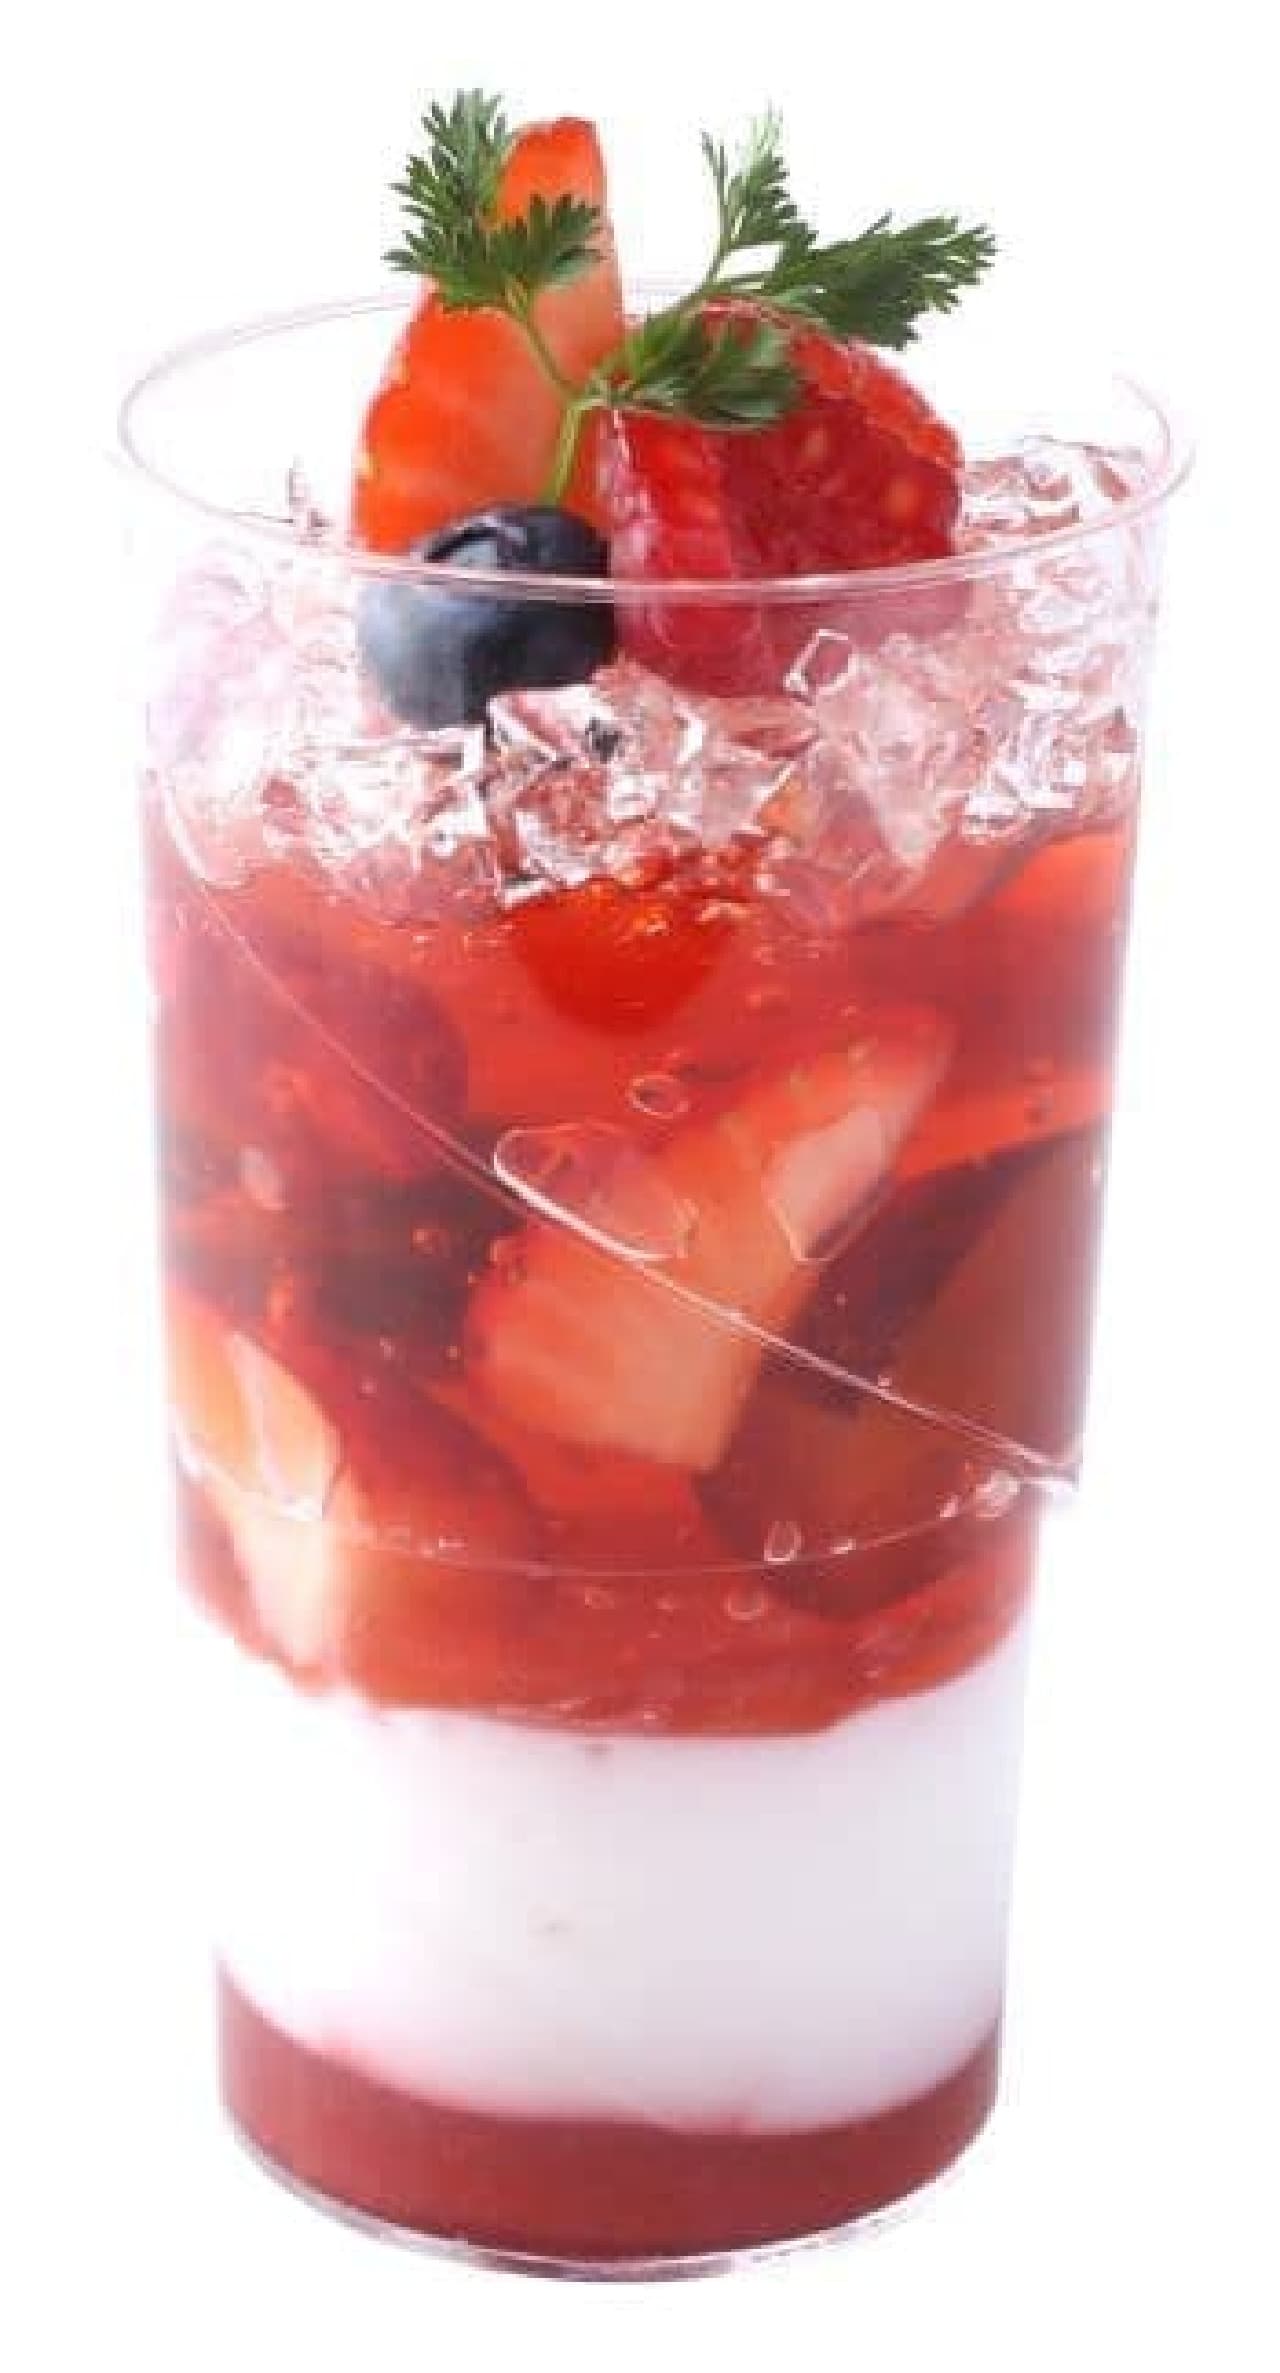 Verrine au Berry is a sweet and sour jelly with coconut jelly and phrase sauce layered on top of each other.